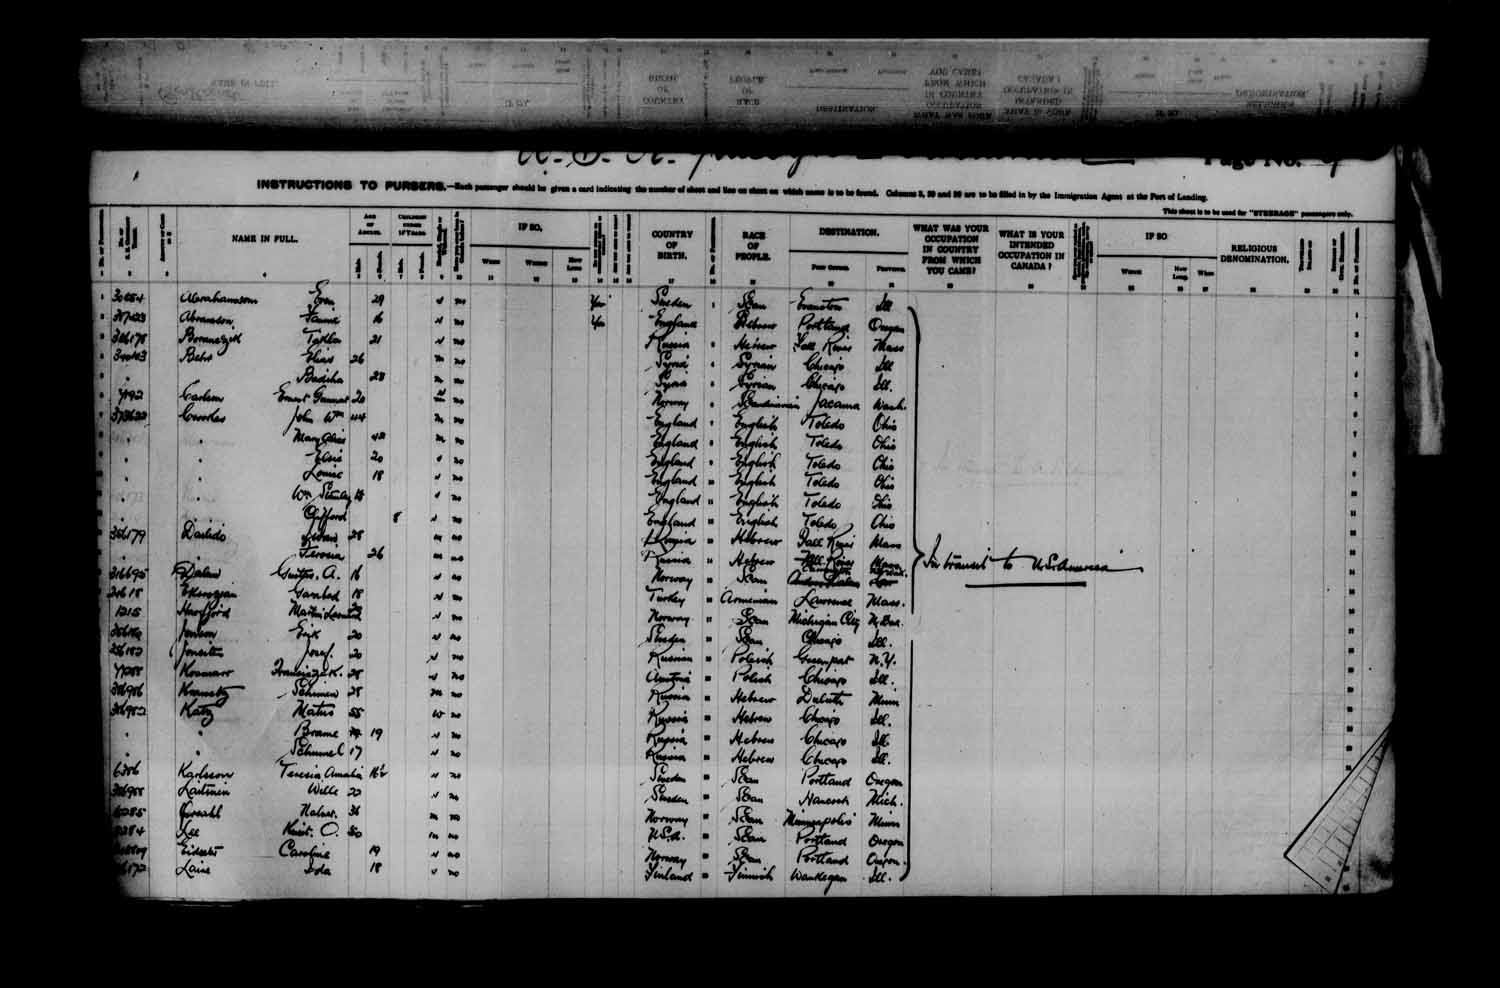 Digitized page of Passenger Lists for Image No.: e003622997